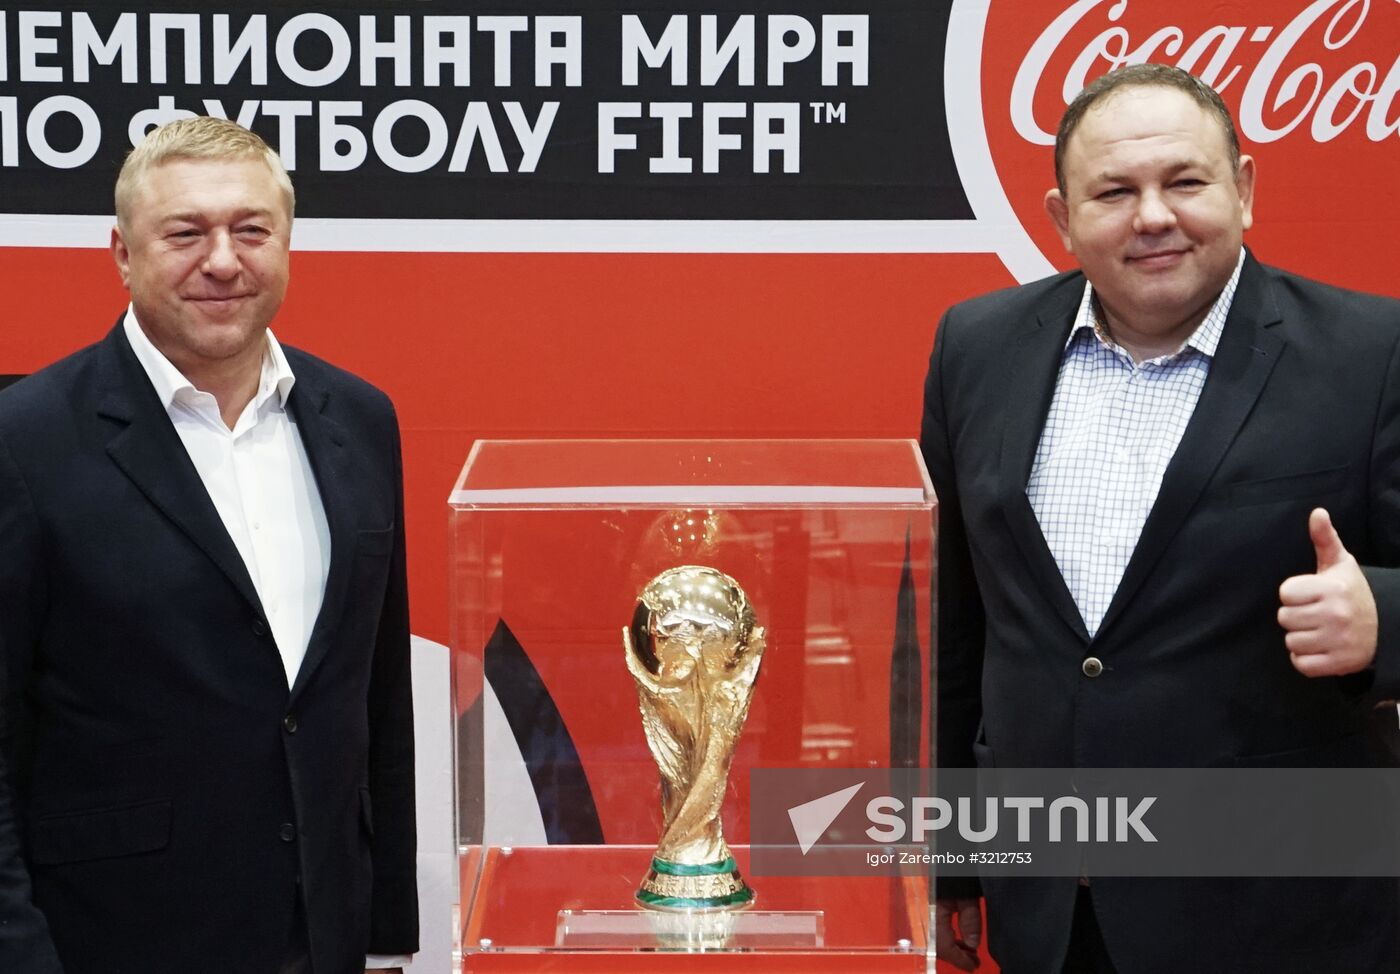 2018 FIFA World Cup trophy presented in Kaliningrad